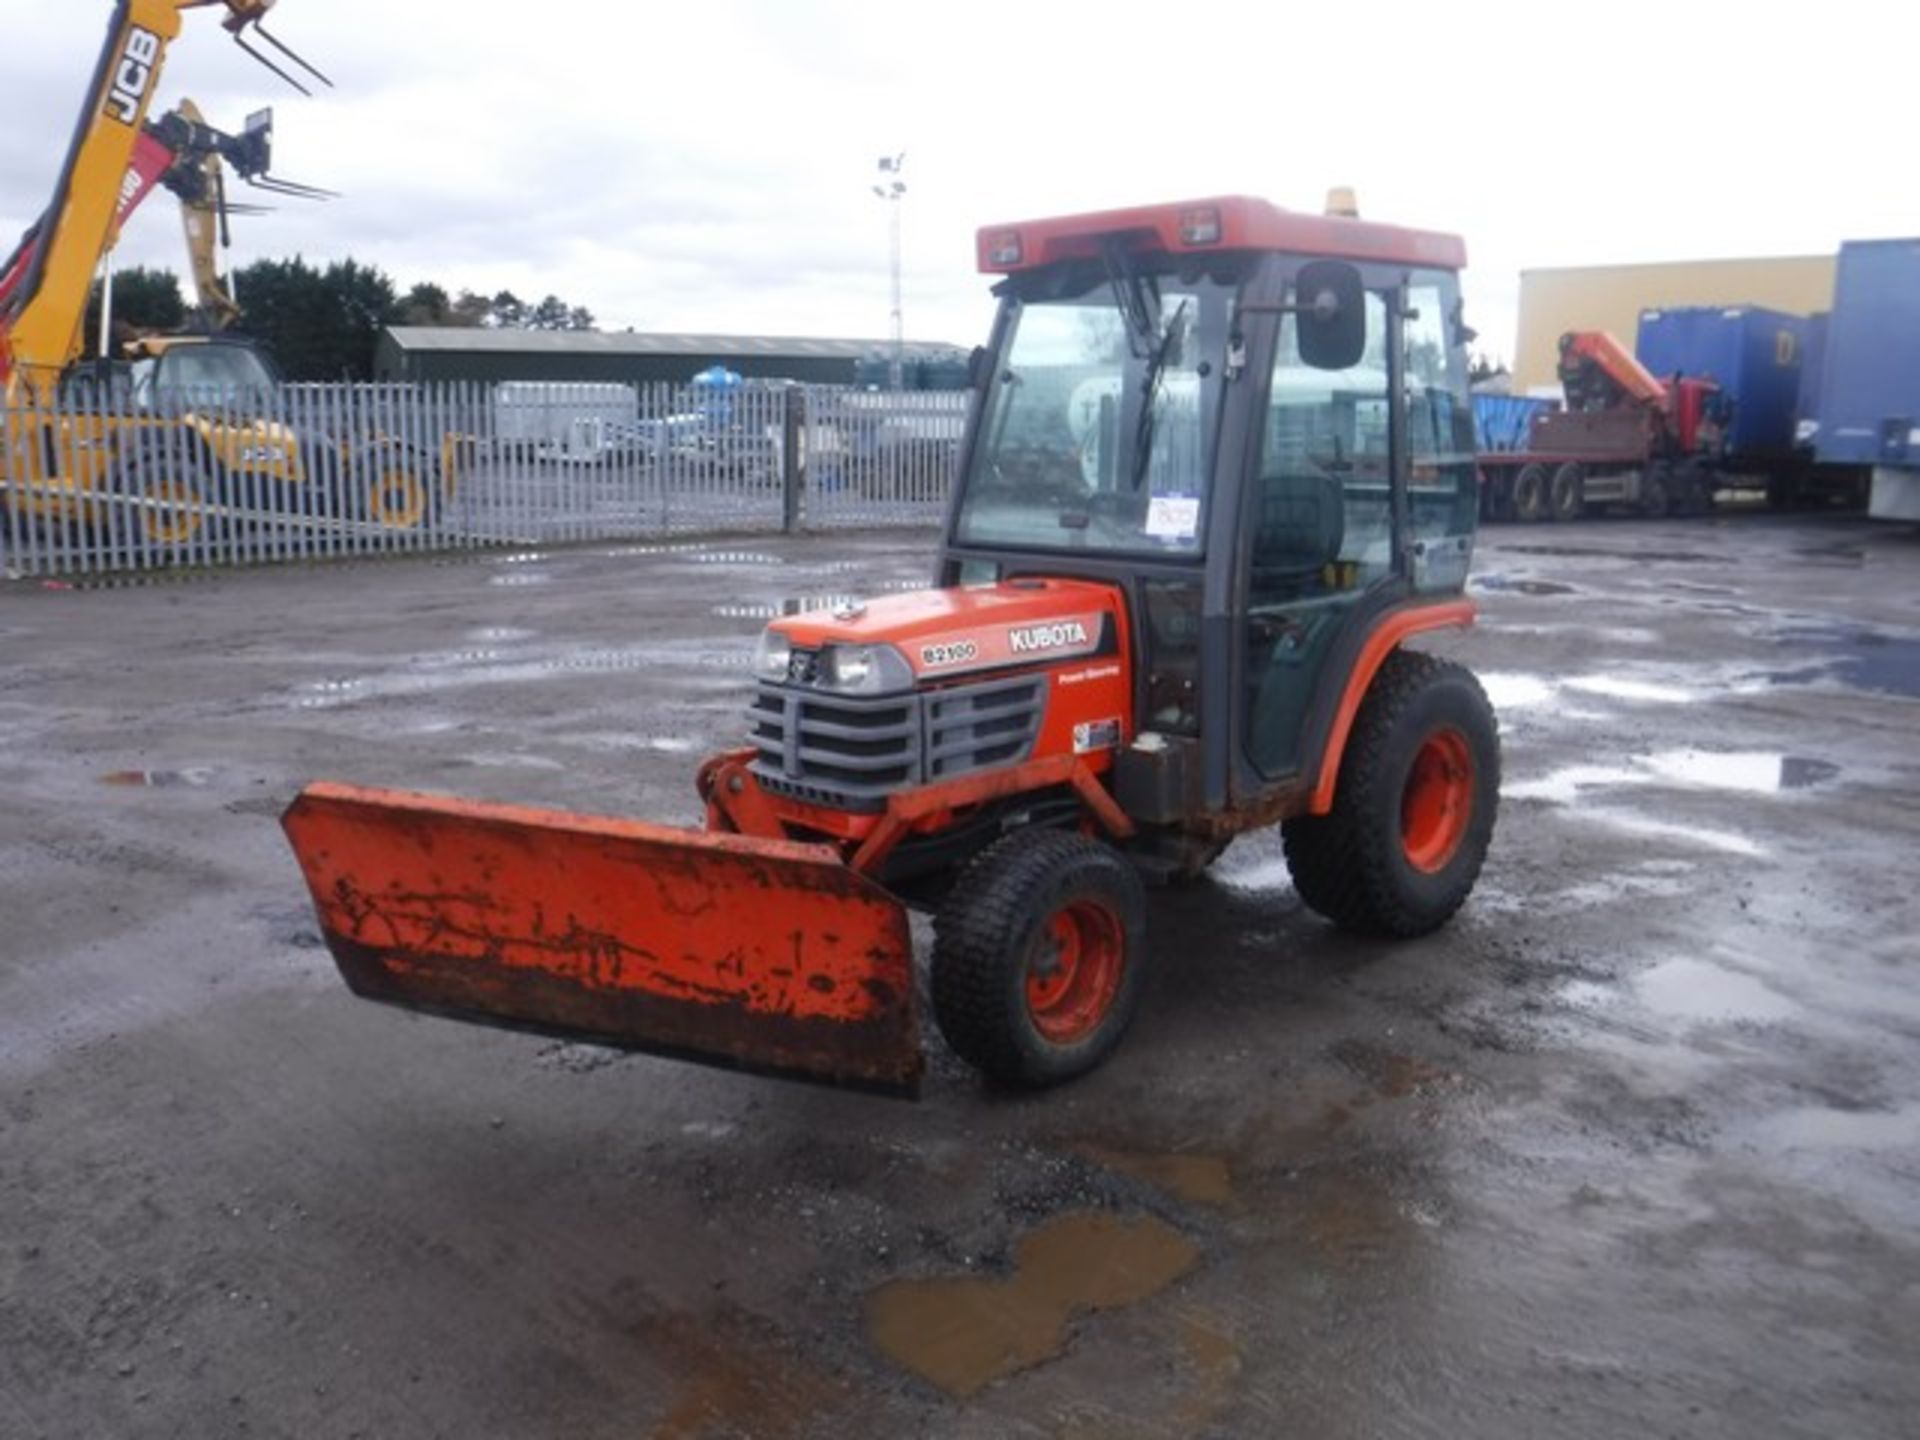 KUBOTA tractor B2100D 2337hrs (not verified) c/w snow plough. V5 in office.